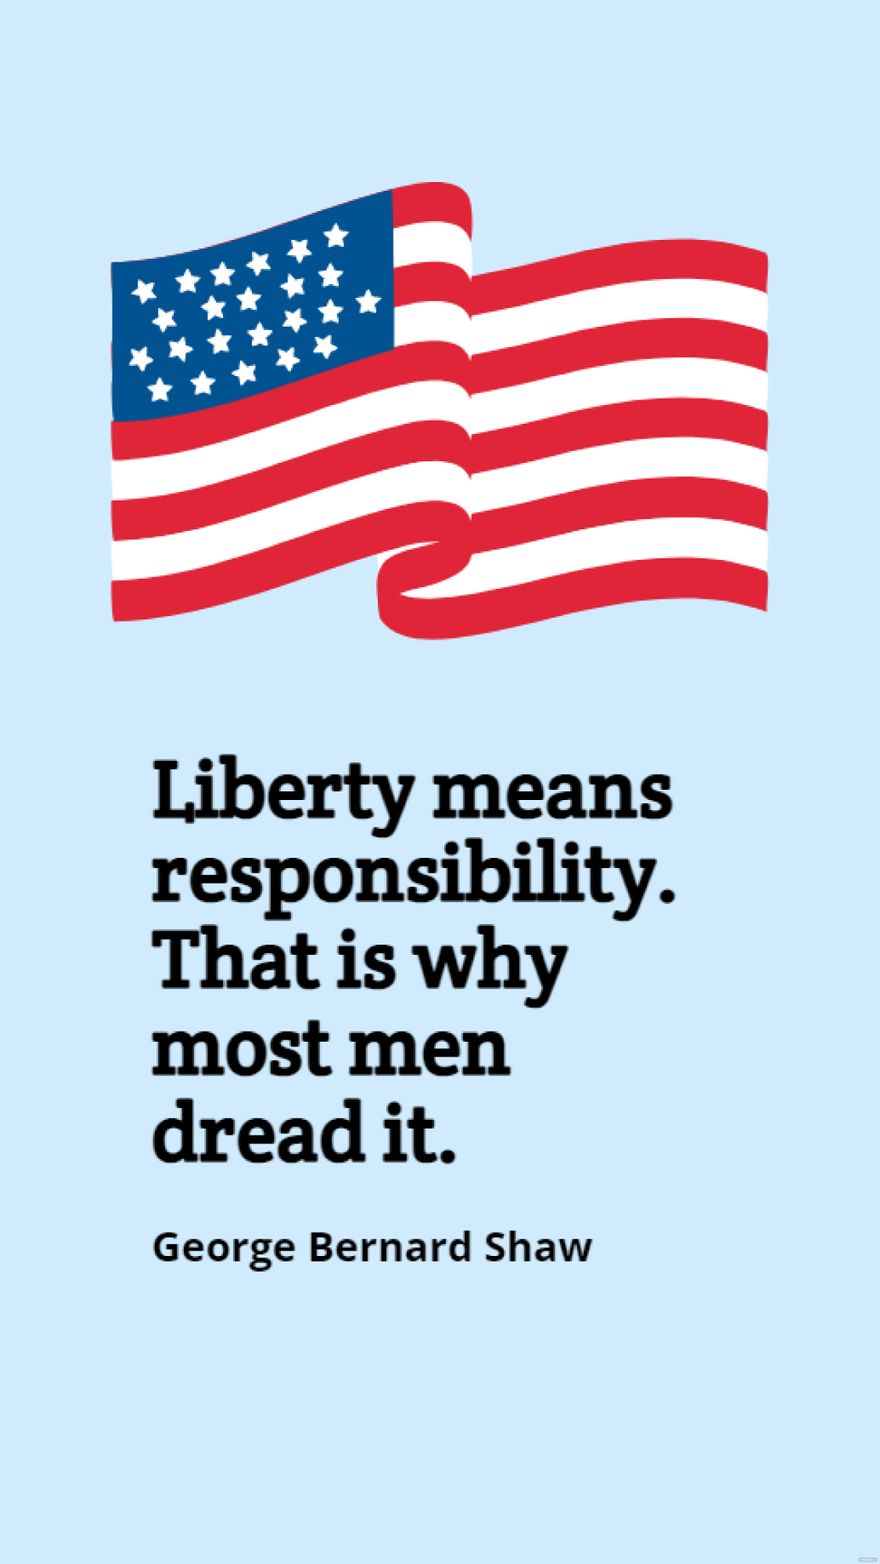 George Bernard Shaw - Liberty means responsibility. That is why most men dread it. in JPG